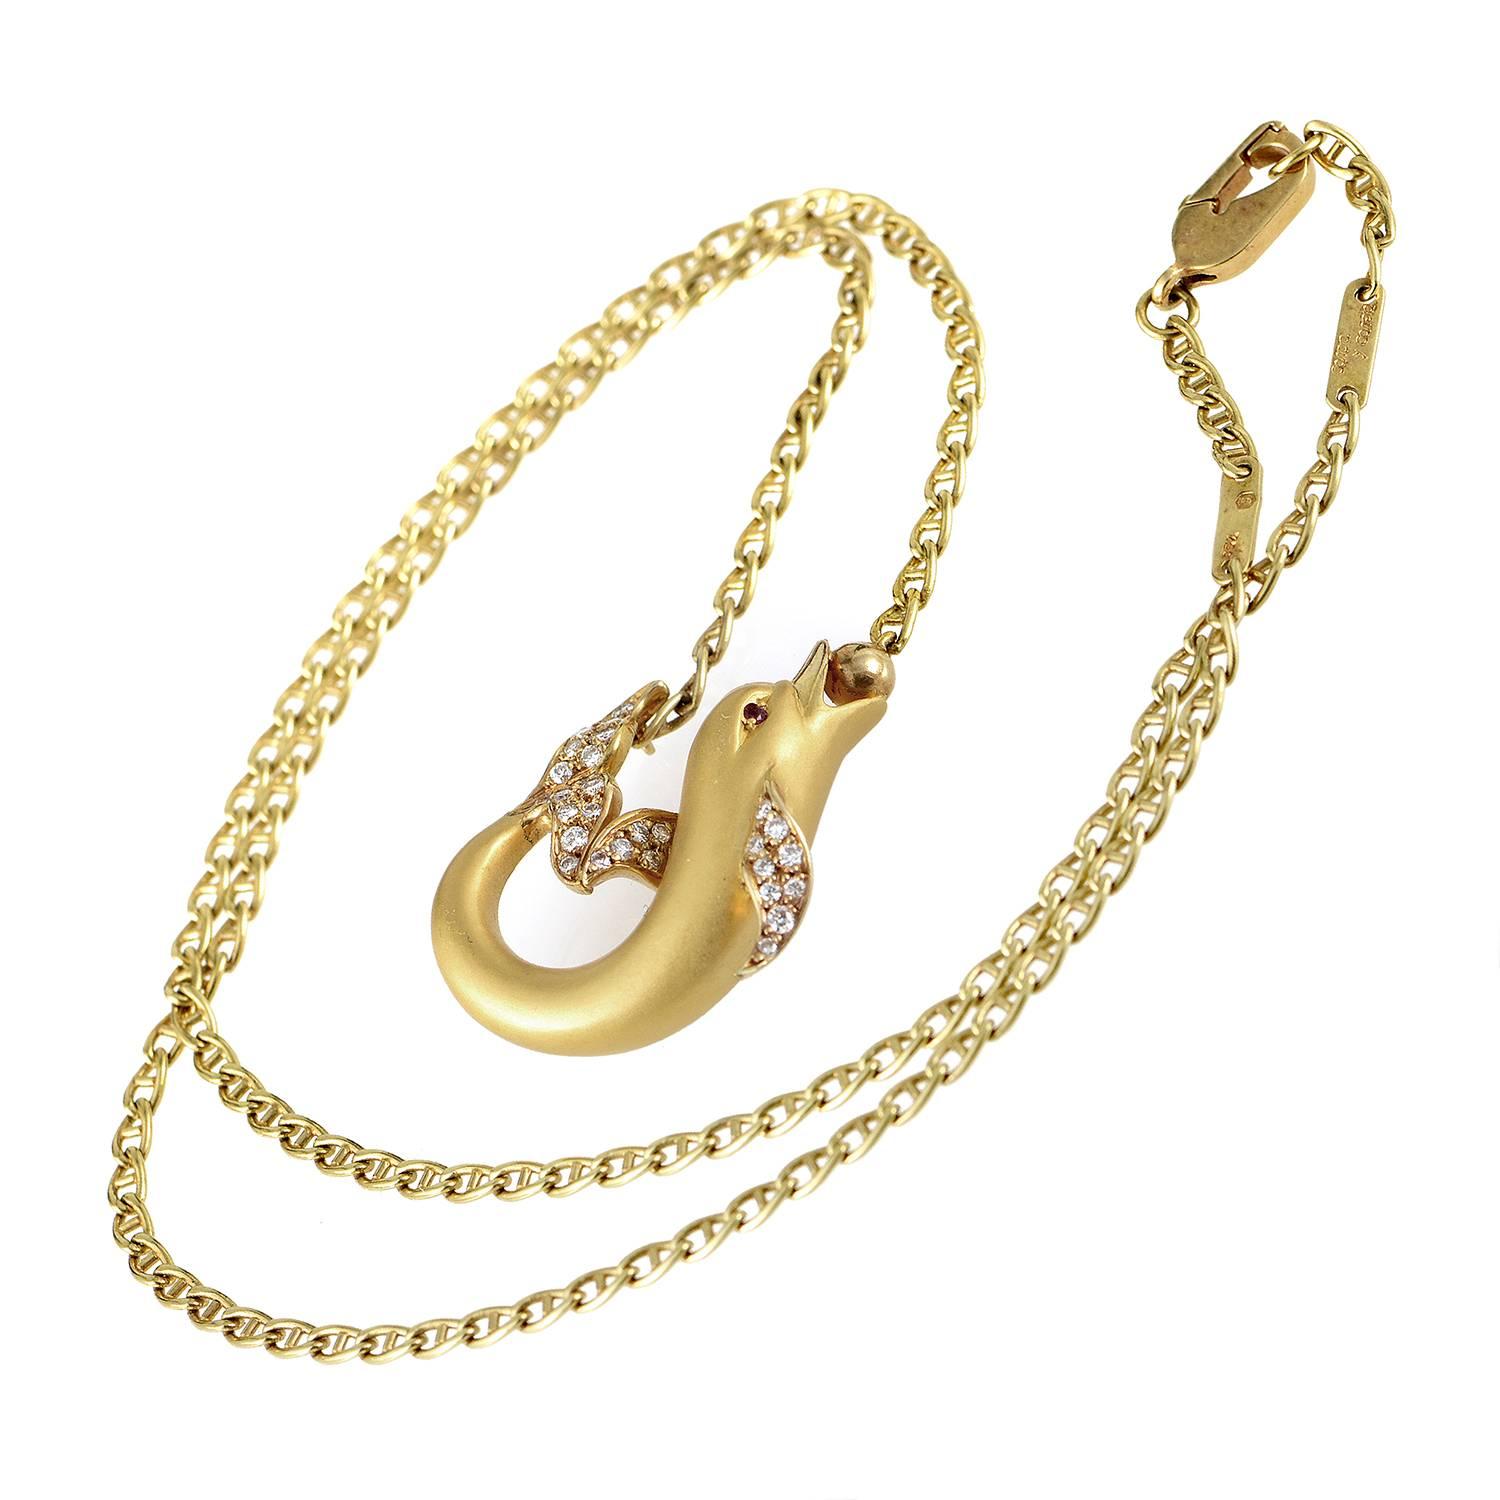 Boasting an impeccably crafted pendant in form of a fish - attached onto neat flat mariner chain and embellished with diamond and ruby stones - this lovely Carrera y Carrera necklace offers stylish elegant look, the appeal of its design enhanced